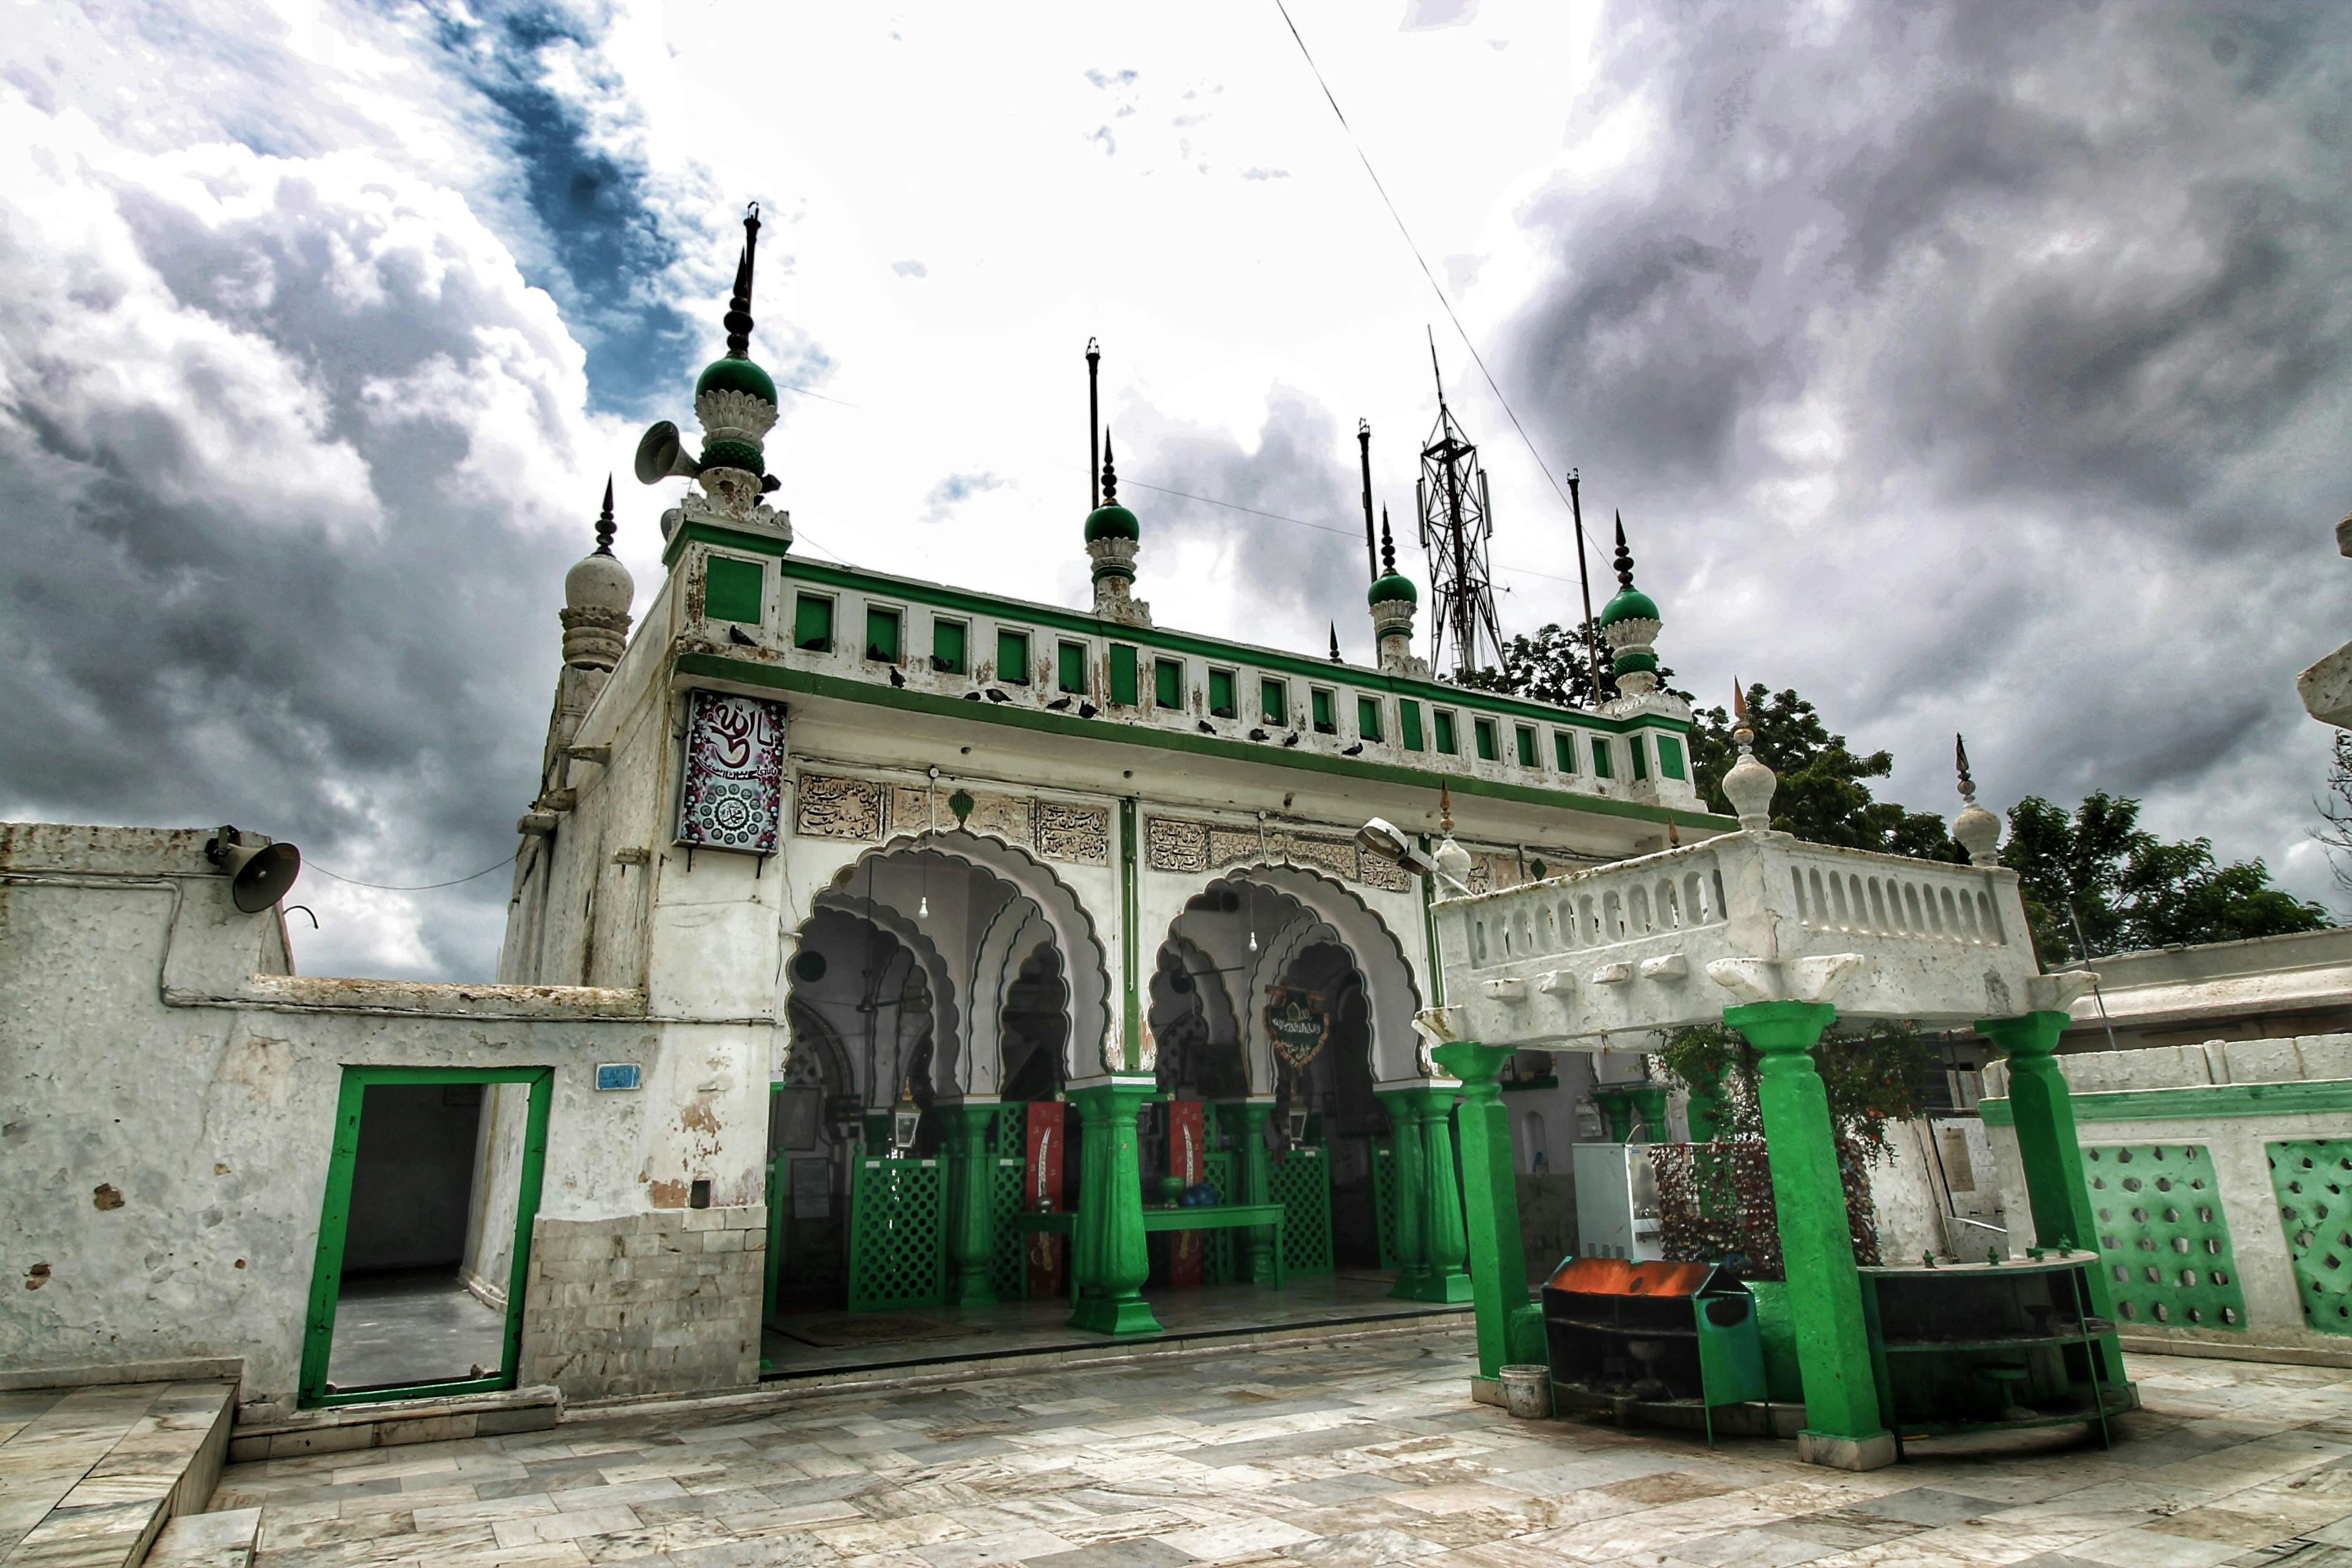 The dargah, perched on top of the hill